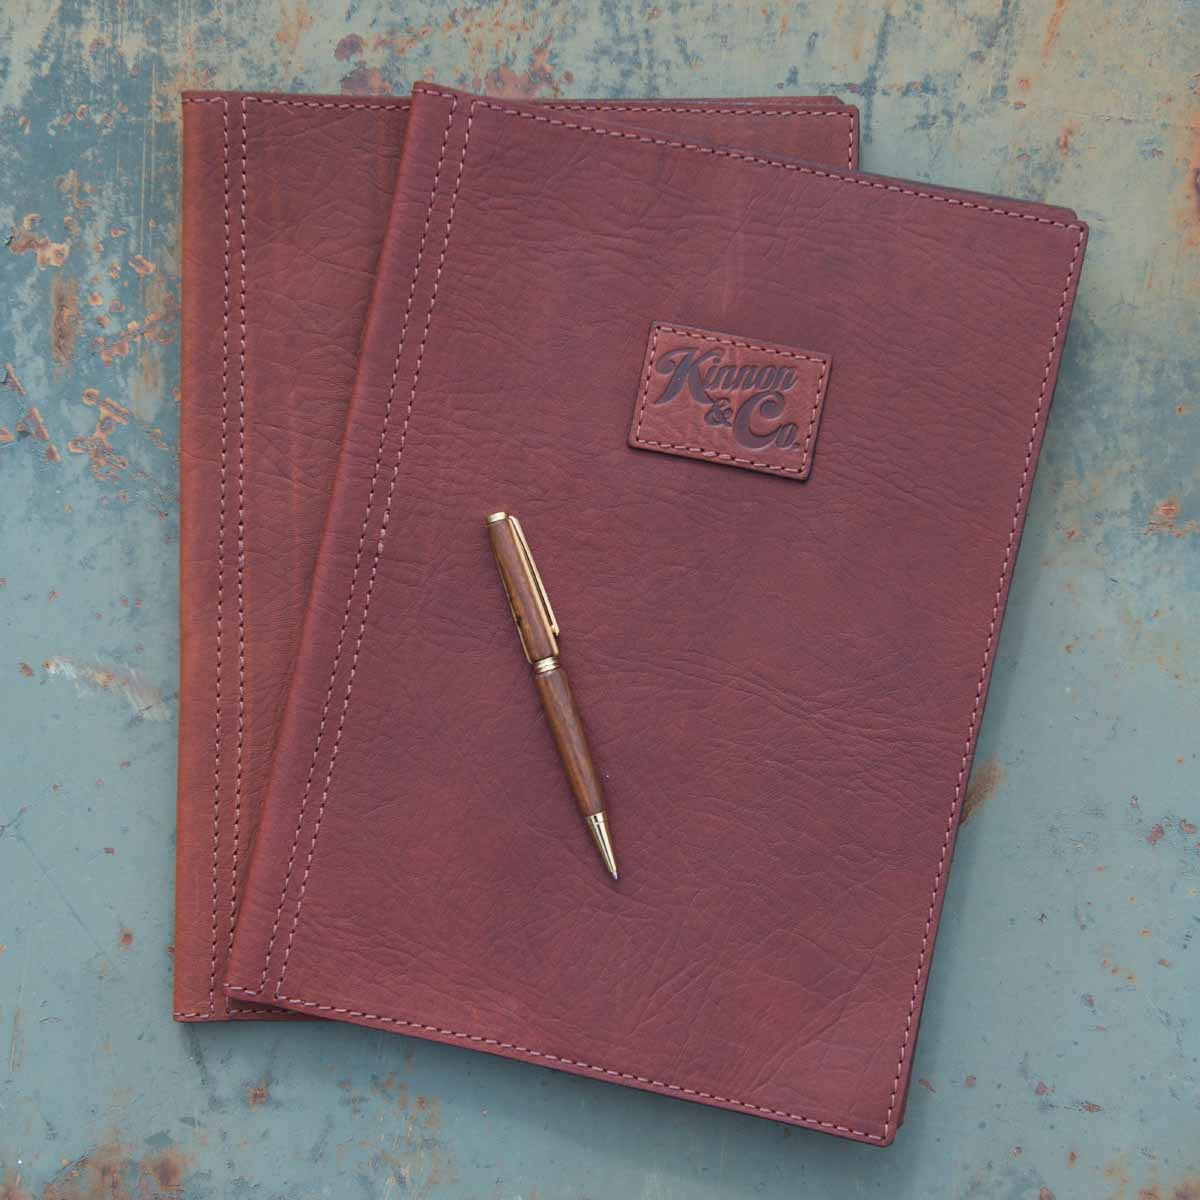 Kinnon and Co branded leather A4 diary covers. 